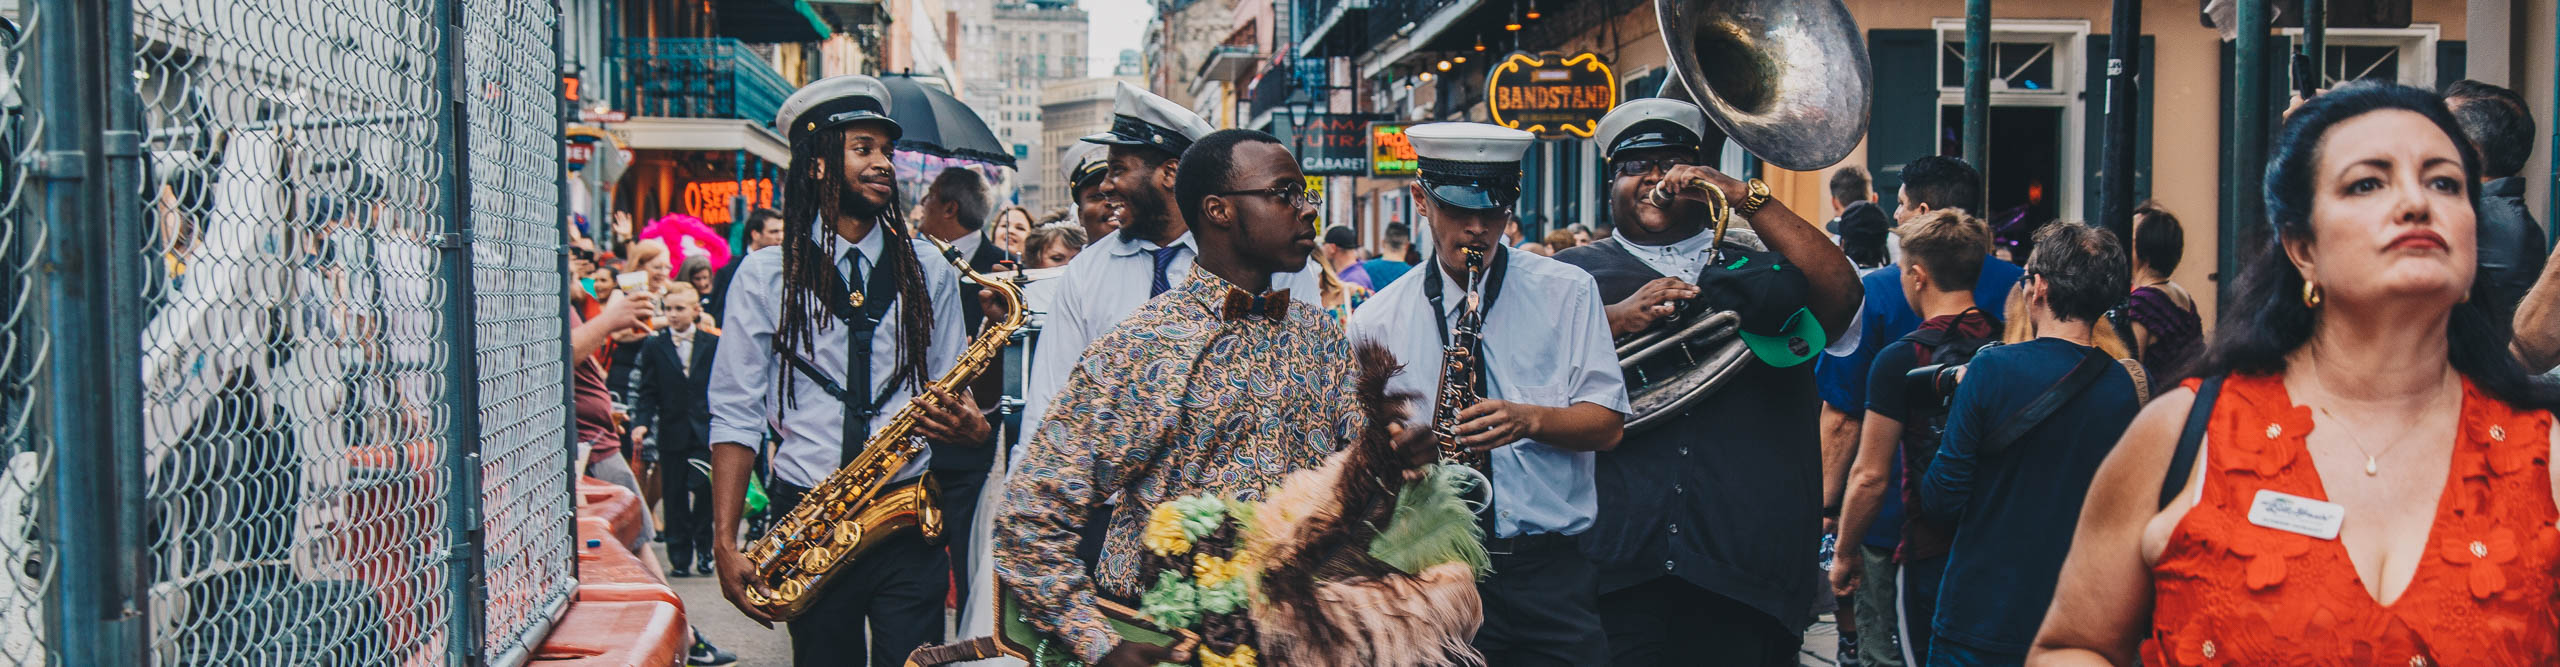 Brass band walking down the street, woman dancing, during Mardi Gras in New Orleans, Louisiana, USA